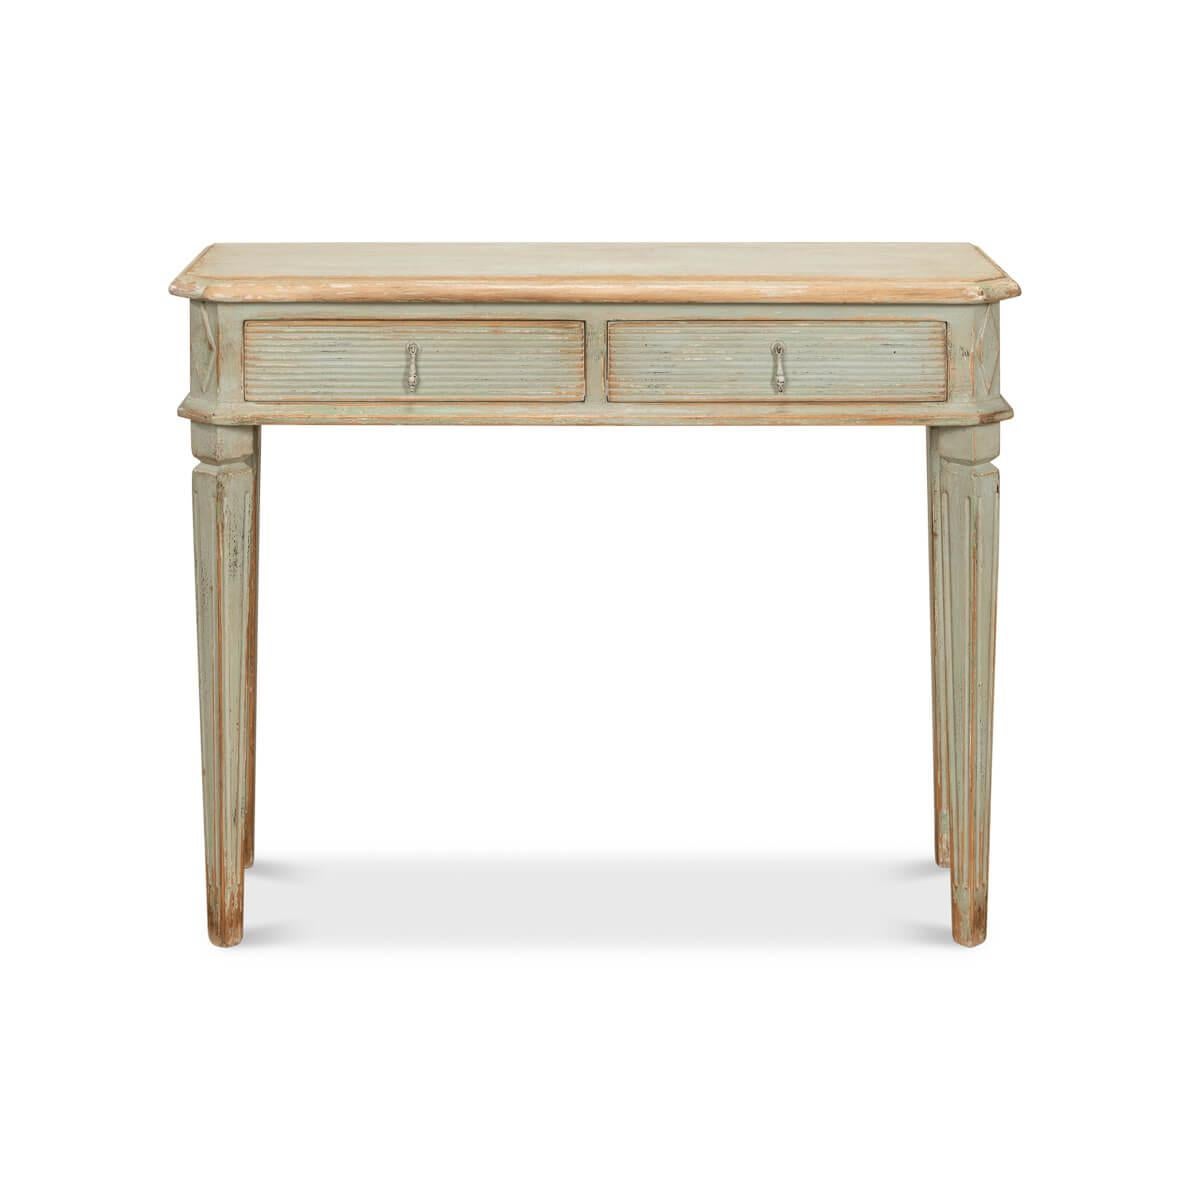 Crafted with loving attention to detail, this table boasts a soft, sage-painted distressed finish, evoking the tranquil essence of time passed in a serene countryside.

The slender, tapered legs set on an angle provide a graceful foundation, while